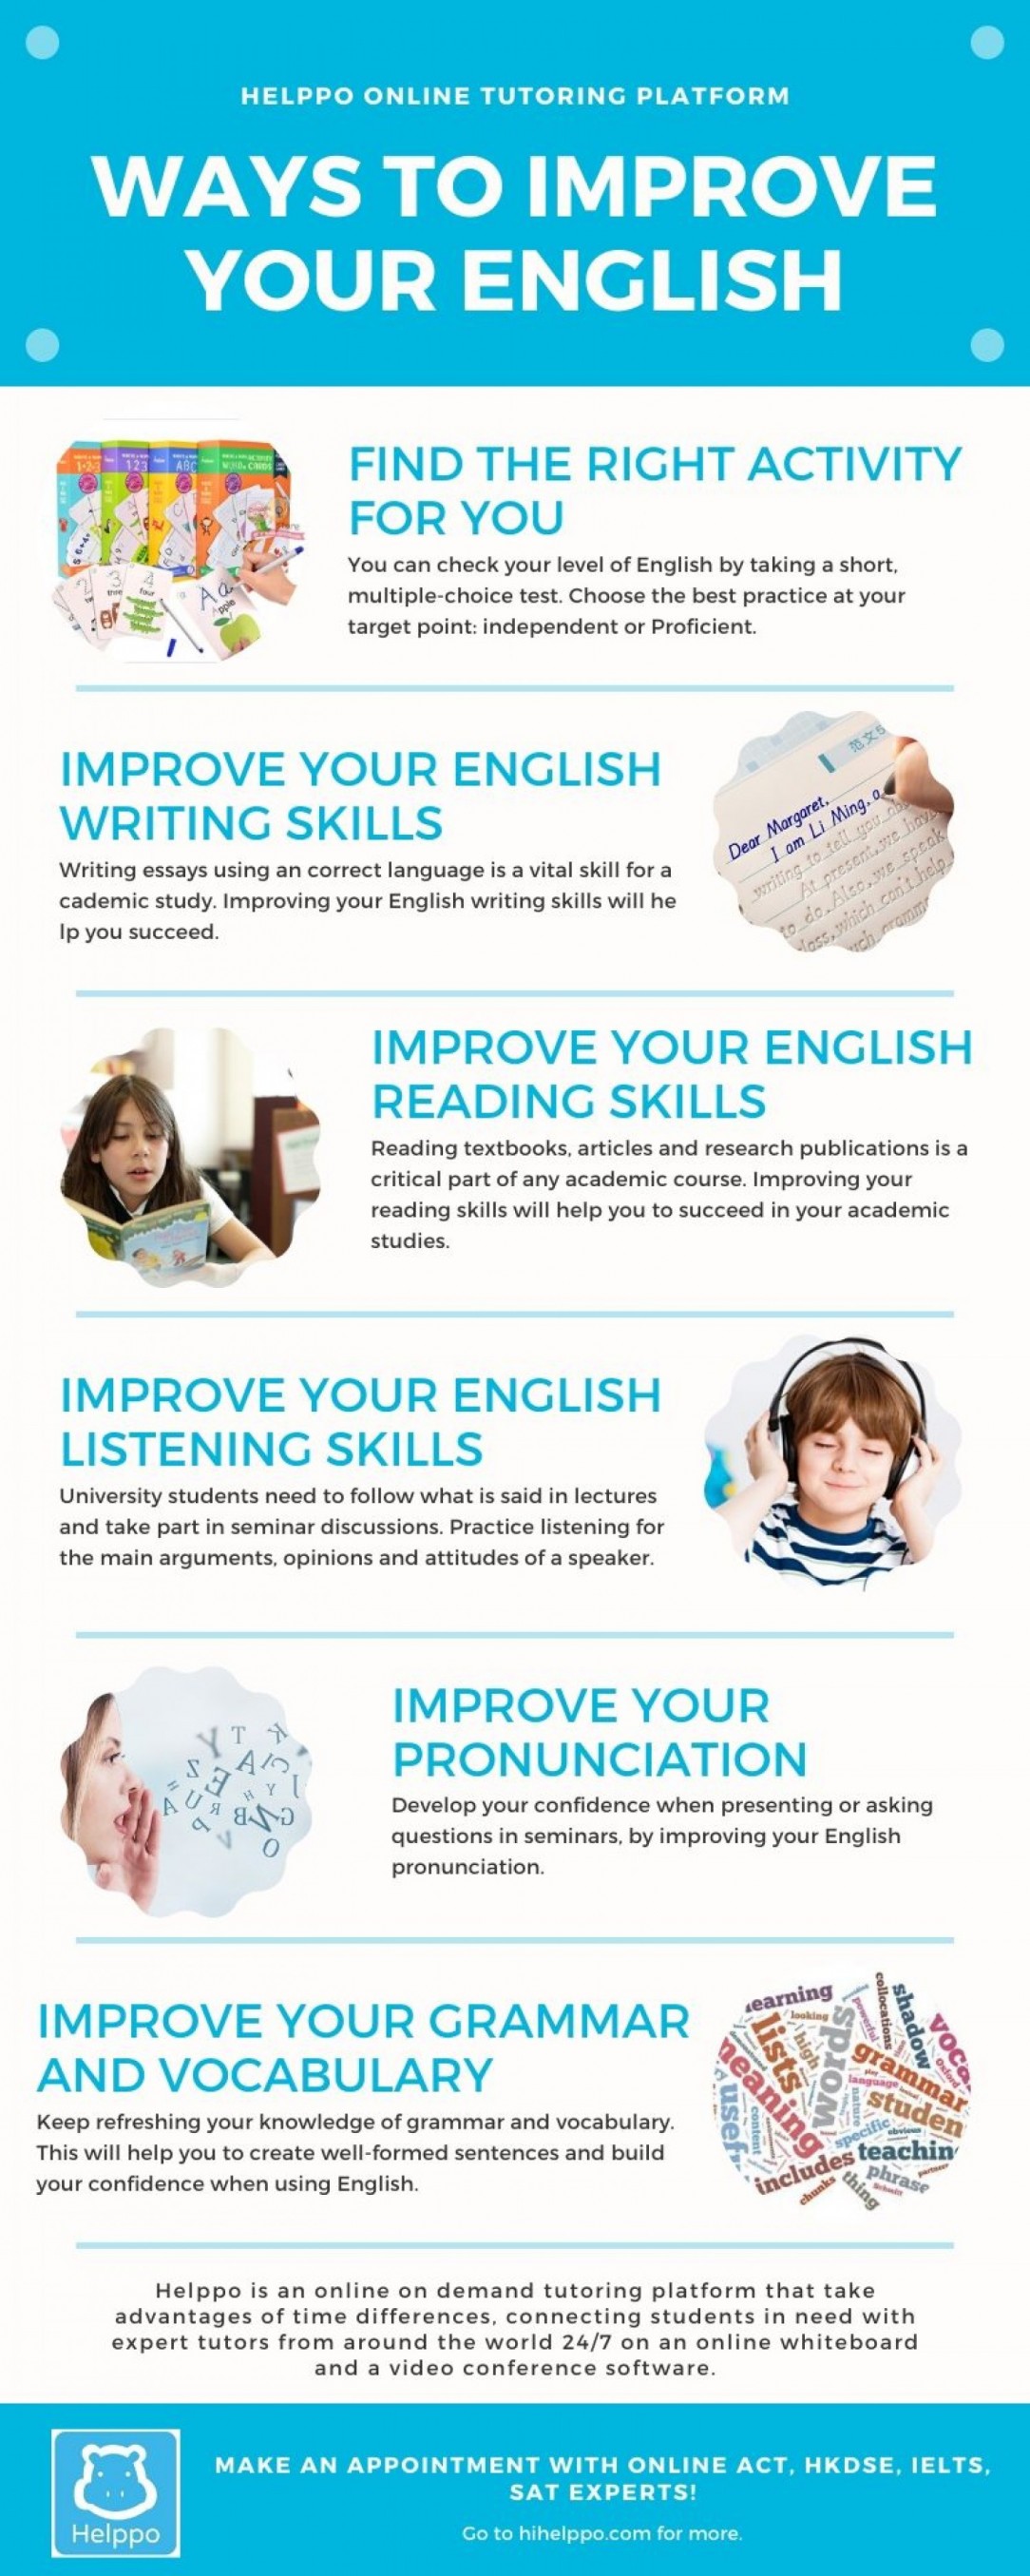 6 Effective Ways to Improve Your English